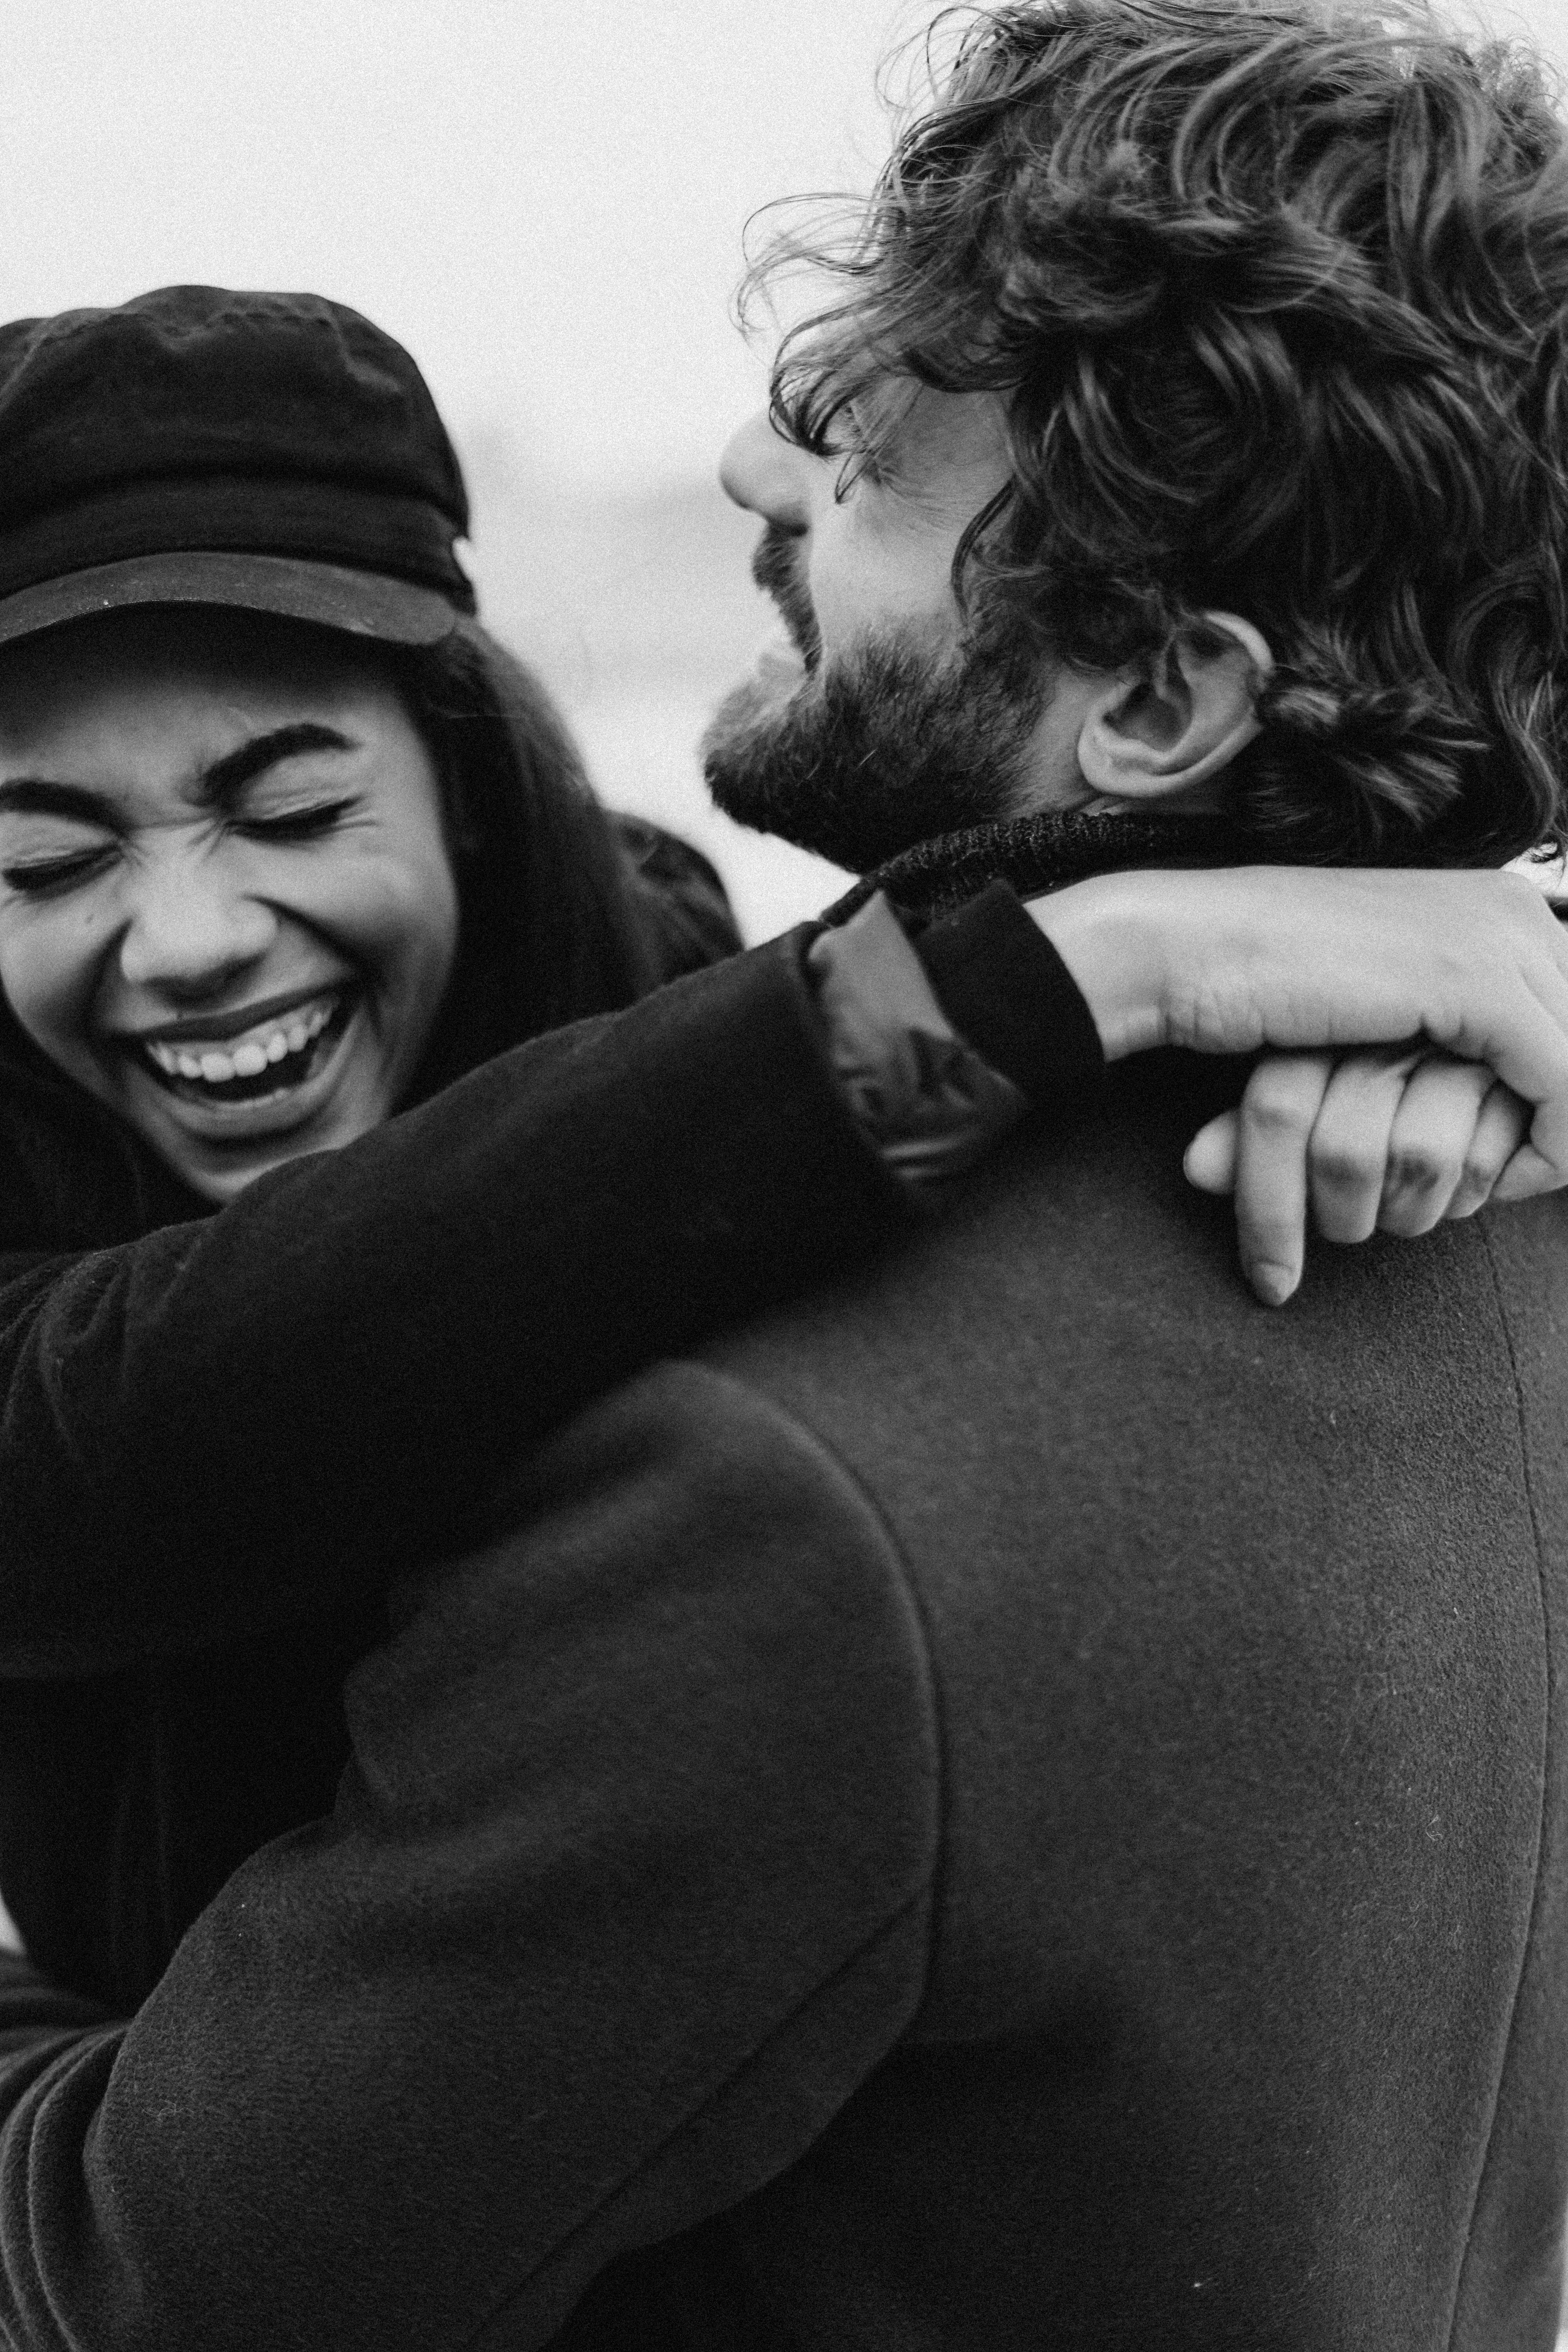 A laughing couple. | Source: Pexels